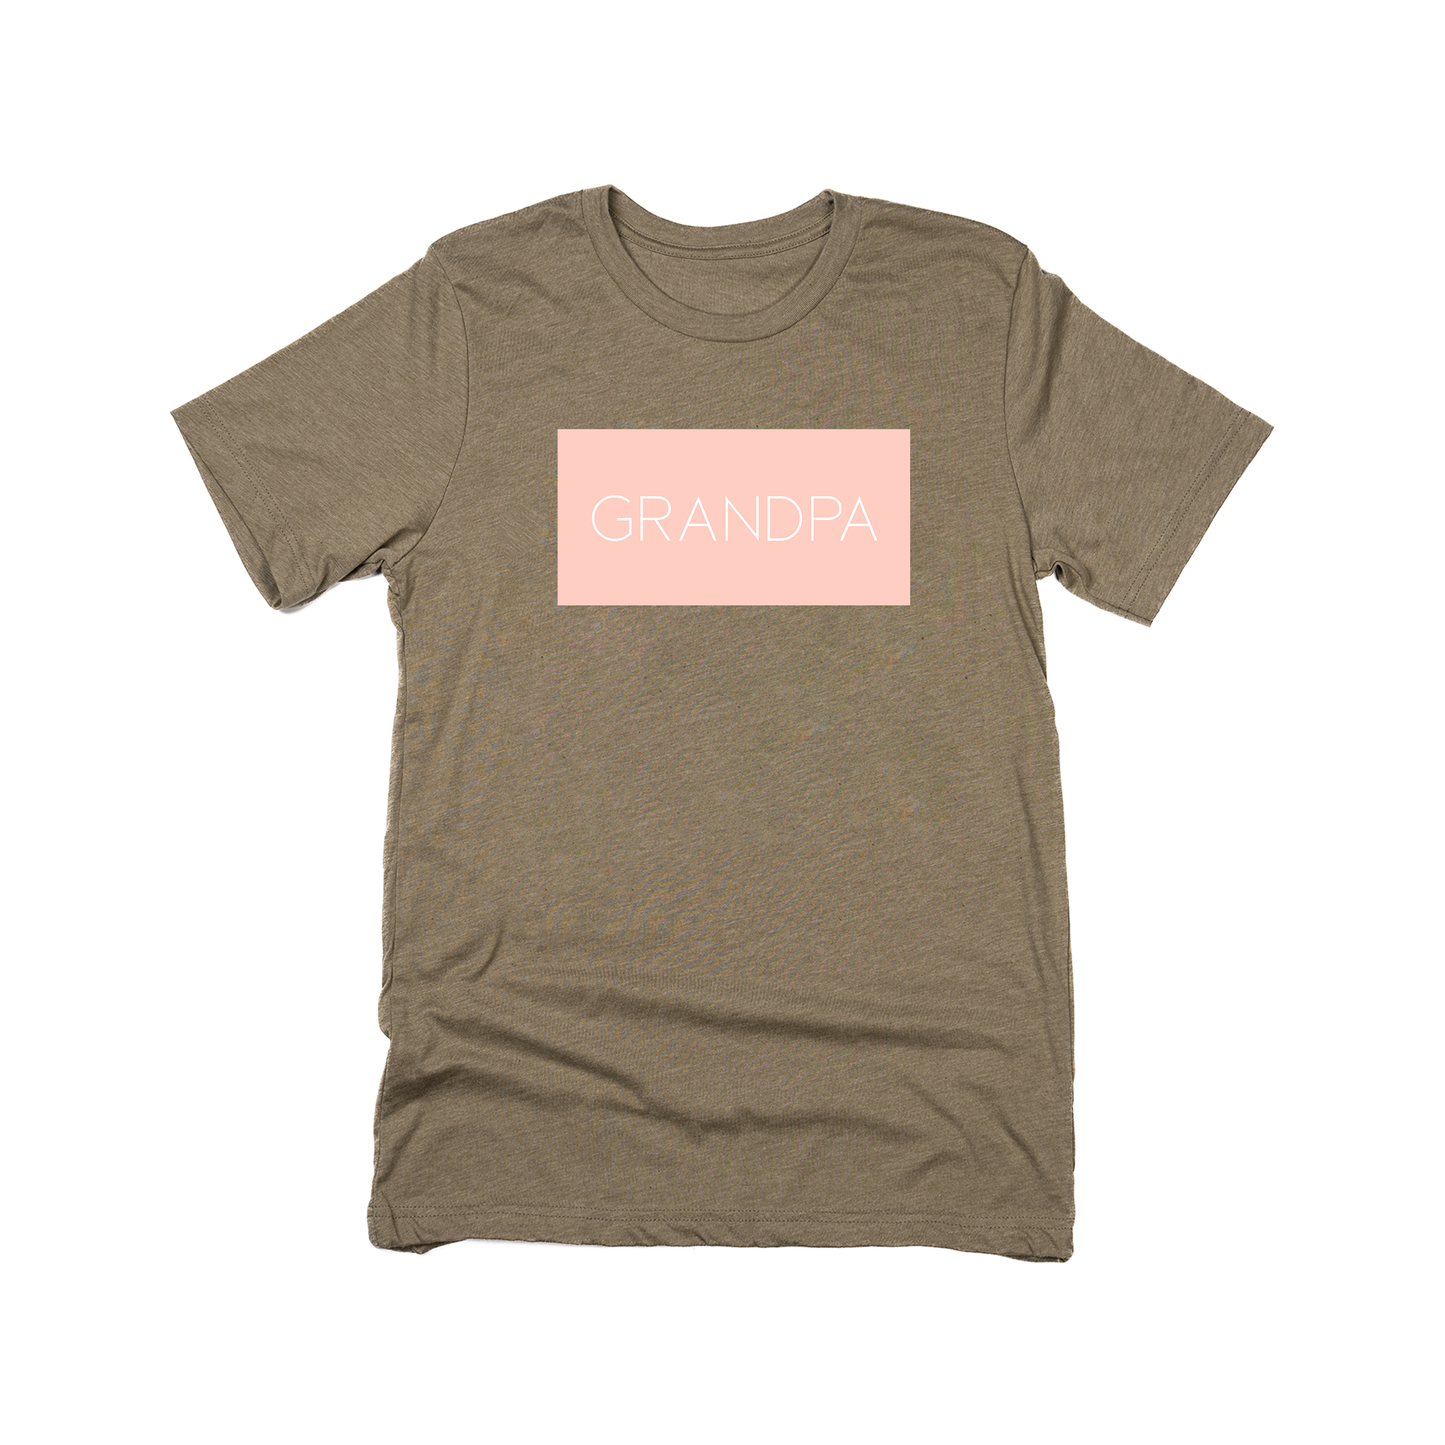 Grandpa (Boxed Collection, Ballerina Pink Box/White Text, Across Front) - Tee (Olive)